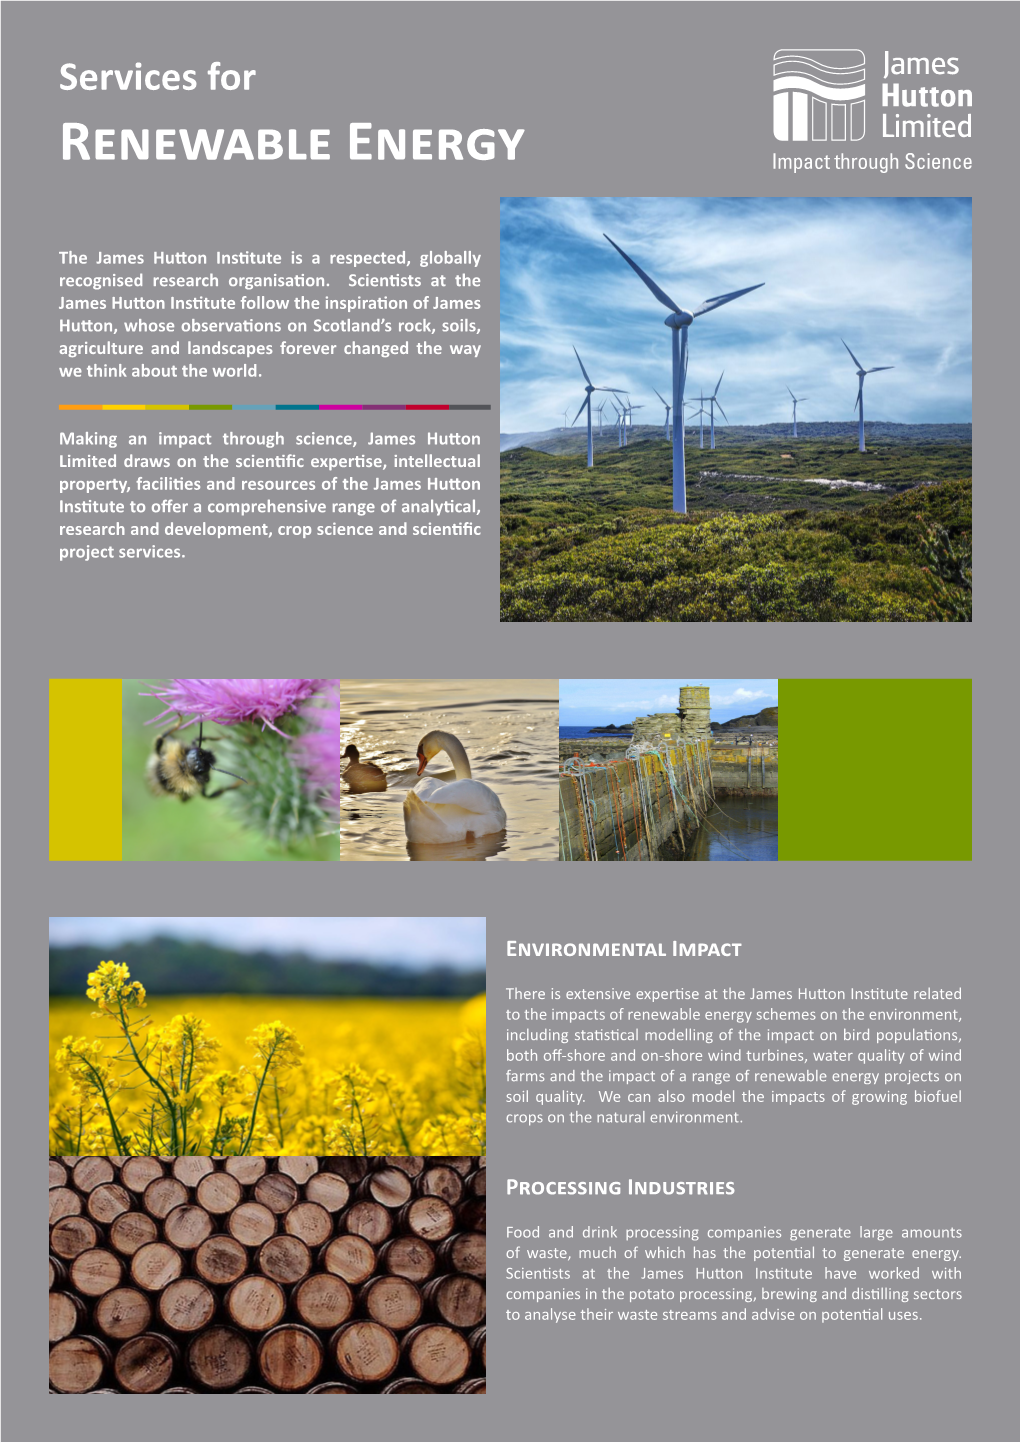 Services for Renewable Energy